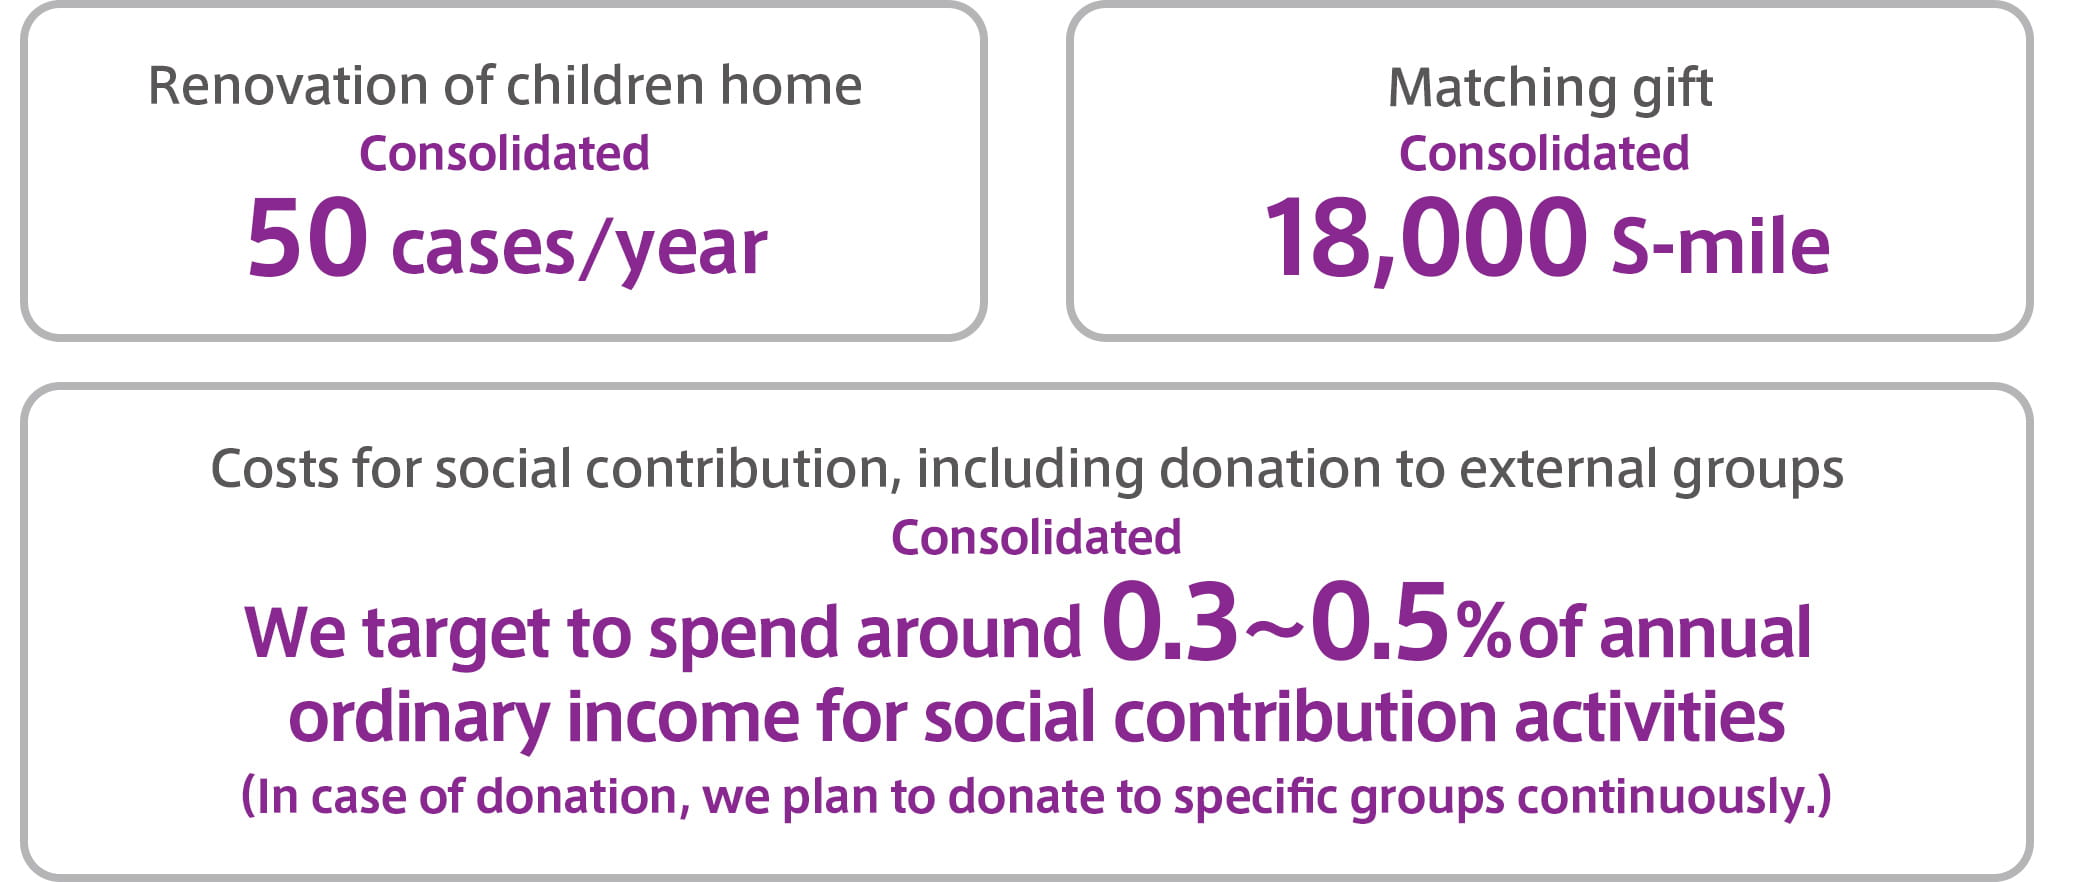 Renovation of children home: Consolidated 50 cases/year, Matching gift: Consolidated 18,000 S-mile, Costs for social contribution, including donation to external groups: Consolidated. We target to spend around 0.3-0.5% of annual ordinary income for social contribution activities. In case of donation, we plan to donate to specific groups continuously.